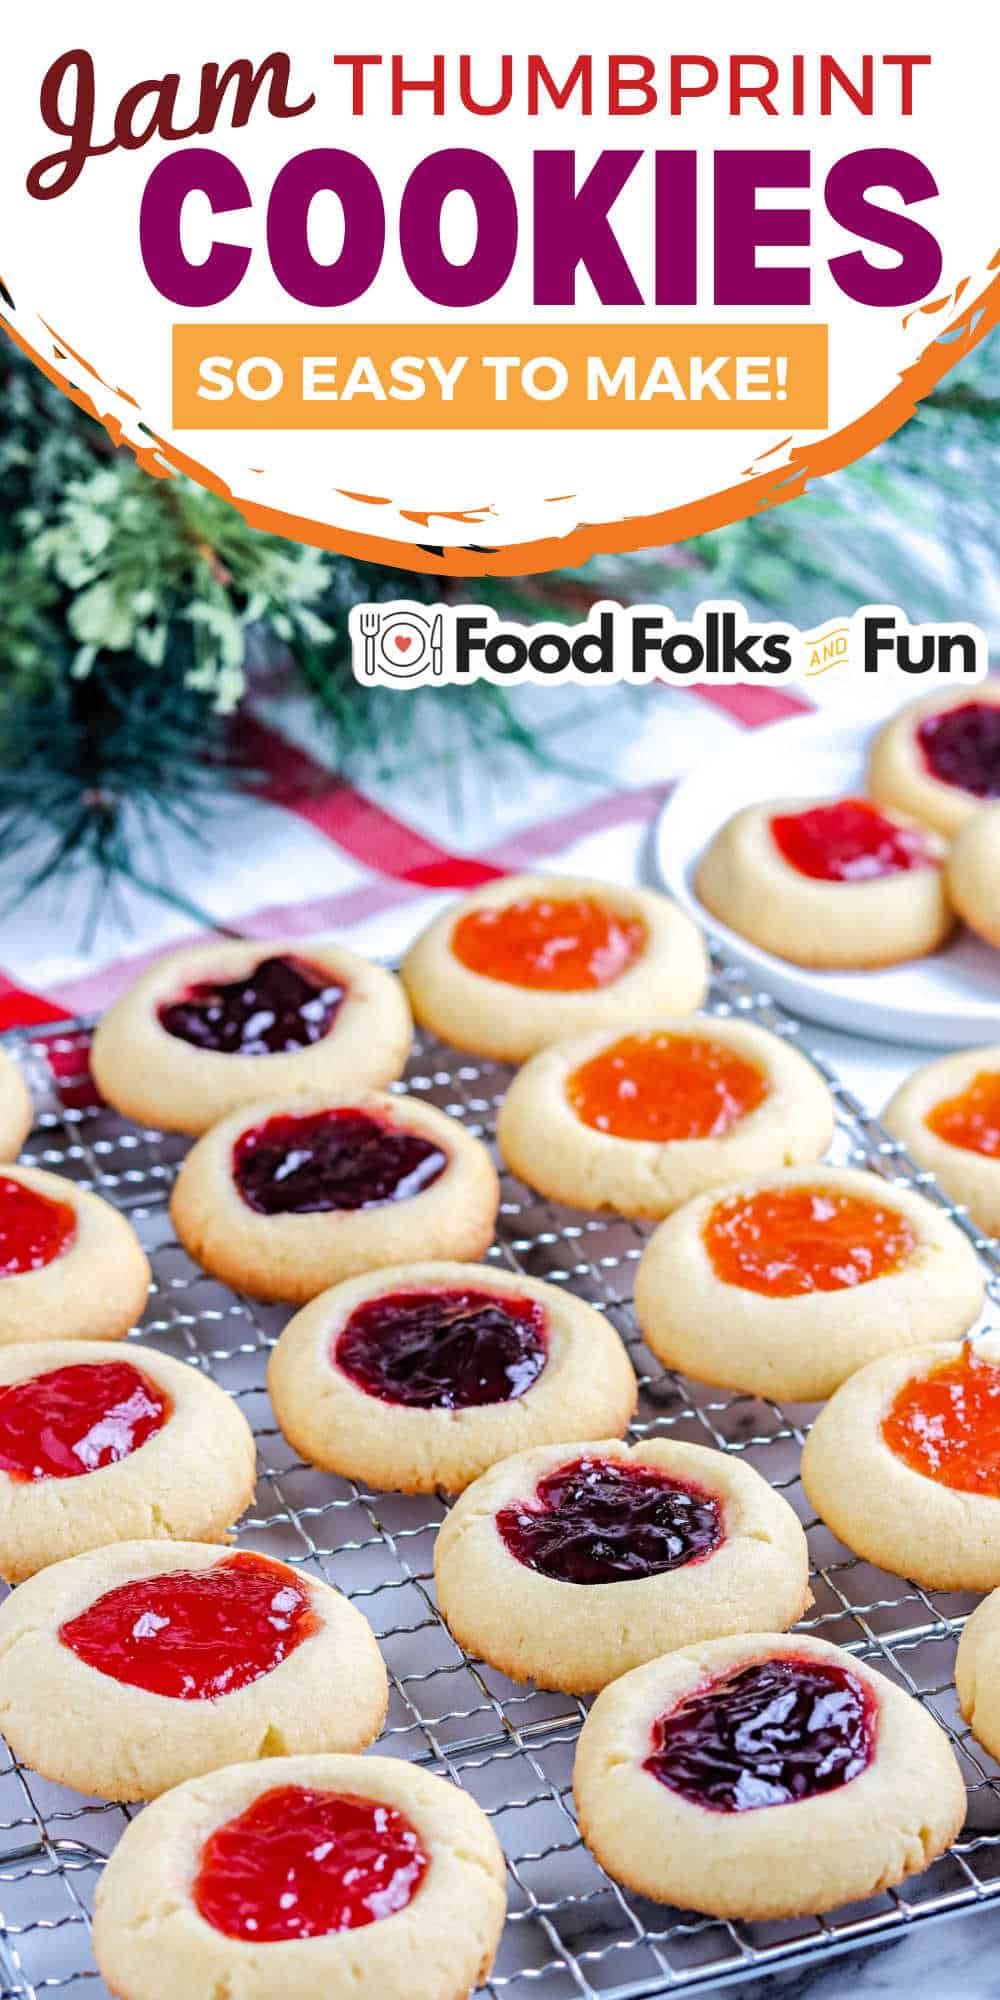 Jam Thumbprint Cookies are an easy, versatile, and classic Christmas Cookie recipe everyone loves to make and eat!  via @foodfolksandfun